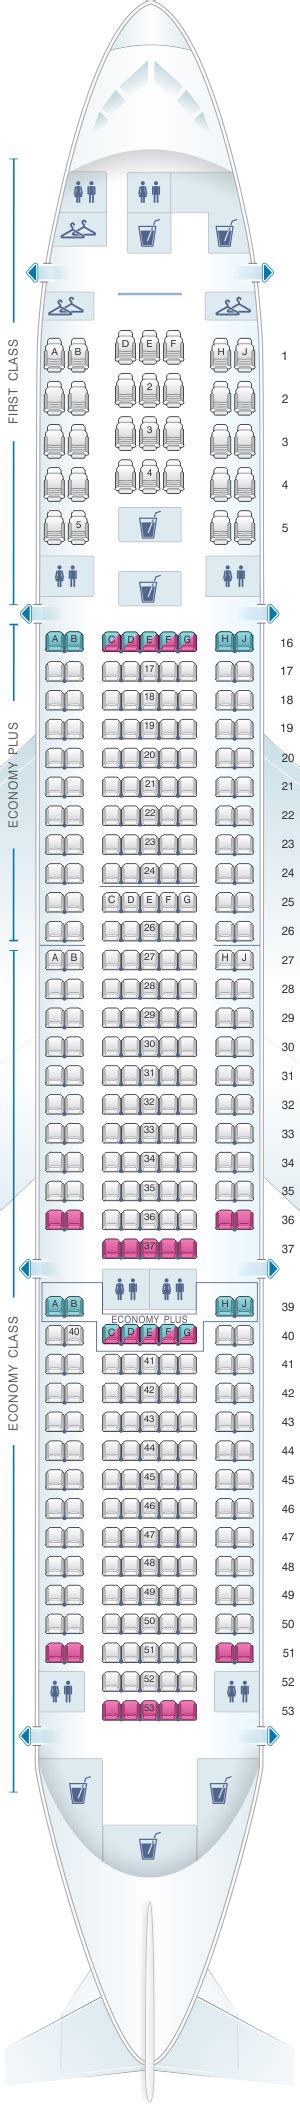 Seat map 777-200 united. Propulsion: Two General Electric GE90 or two Pratt & Whitney PW4070/4090 turbofan engines, rated up to 94,000 pounds of thrust each. Wingspan: 199 feet, 11 inches. Go back to top. View Boeing 777-200 seating and specifications on United aircraft using this United Airlines seating chart. 